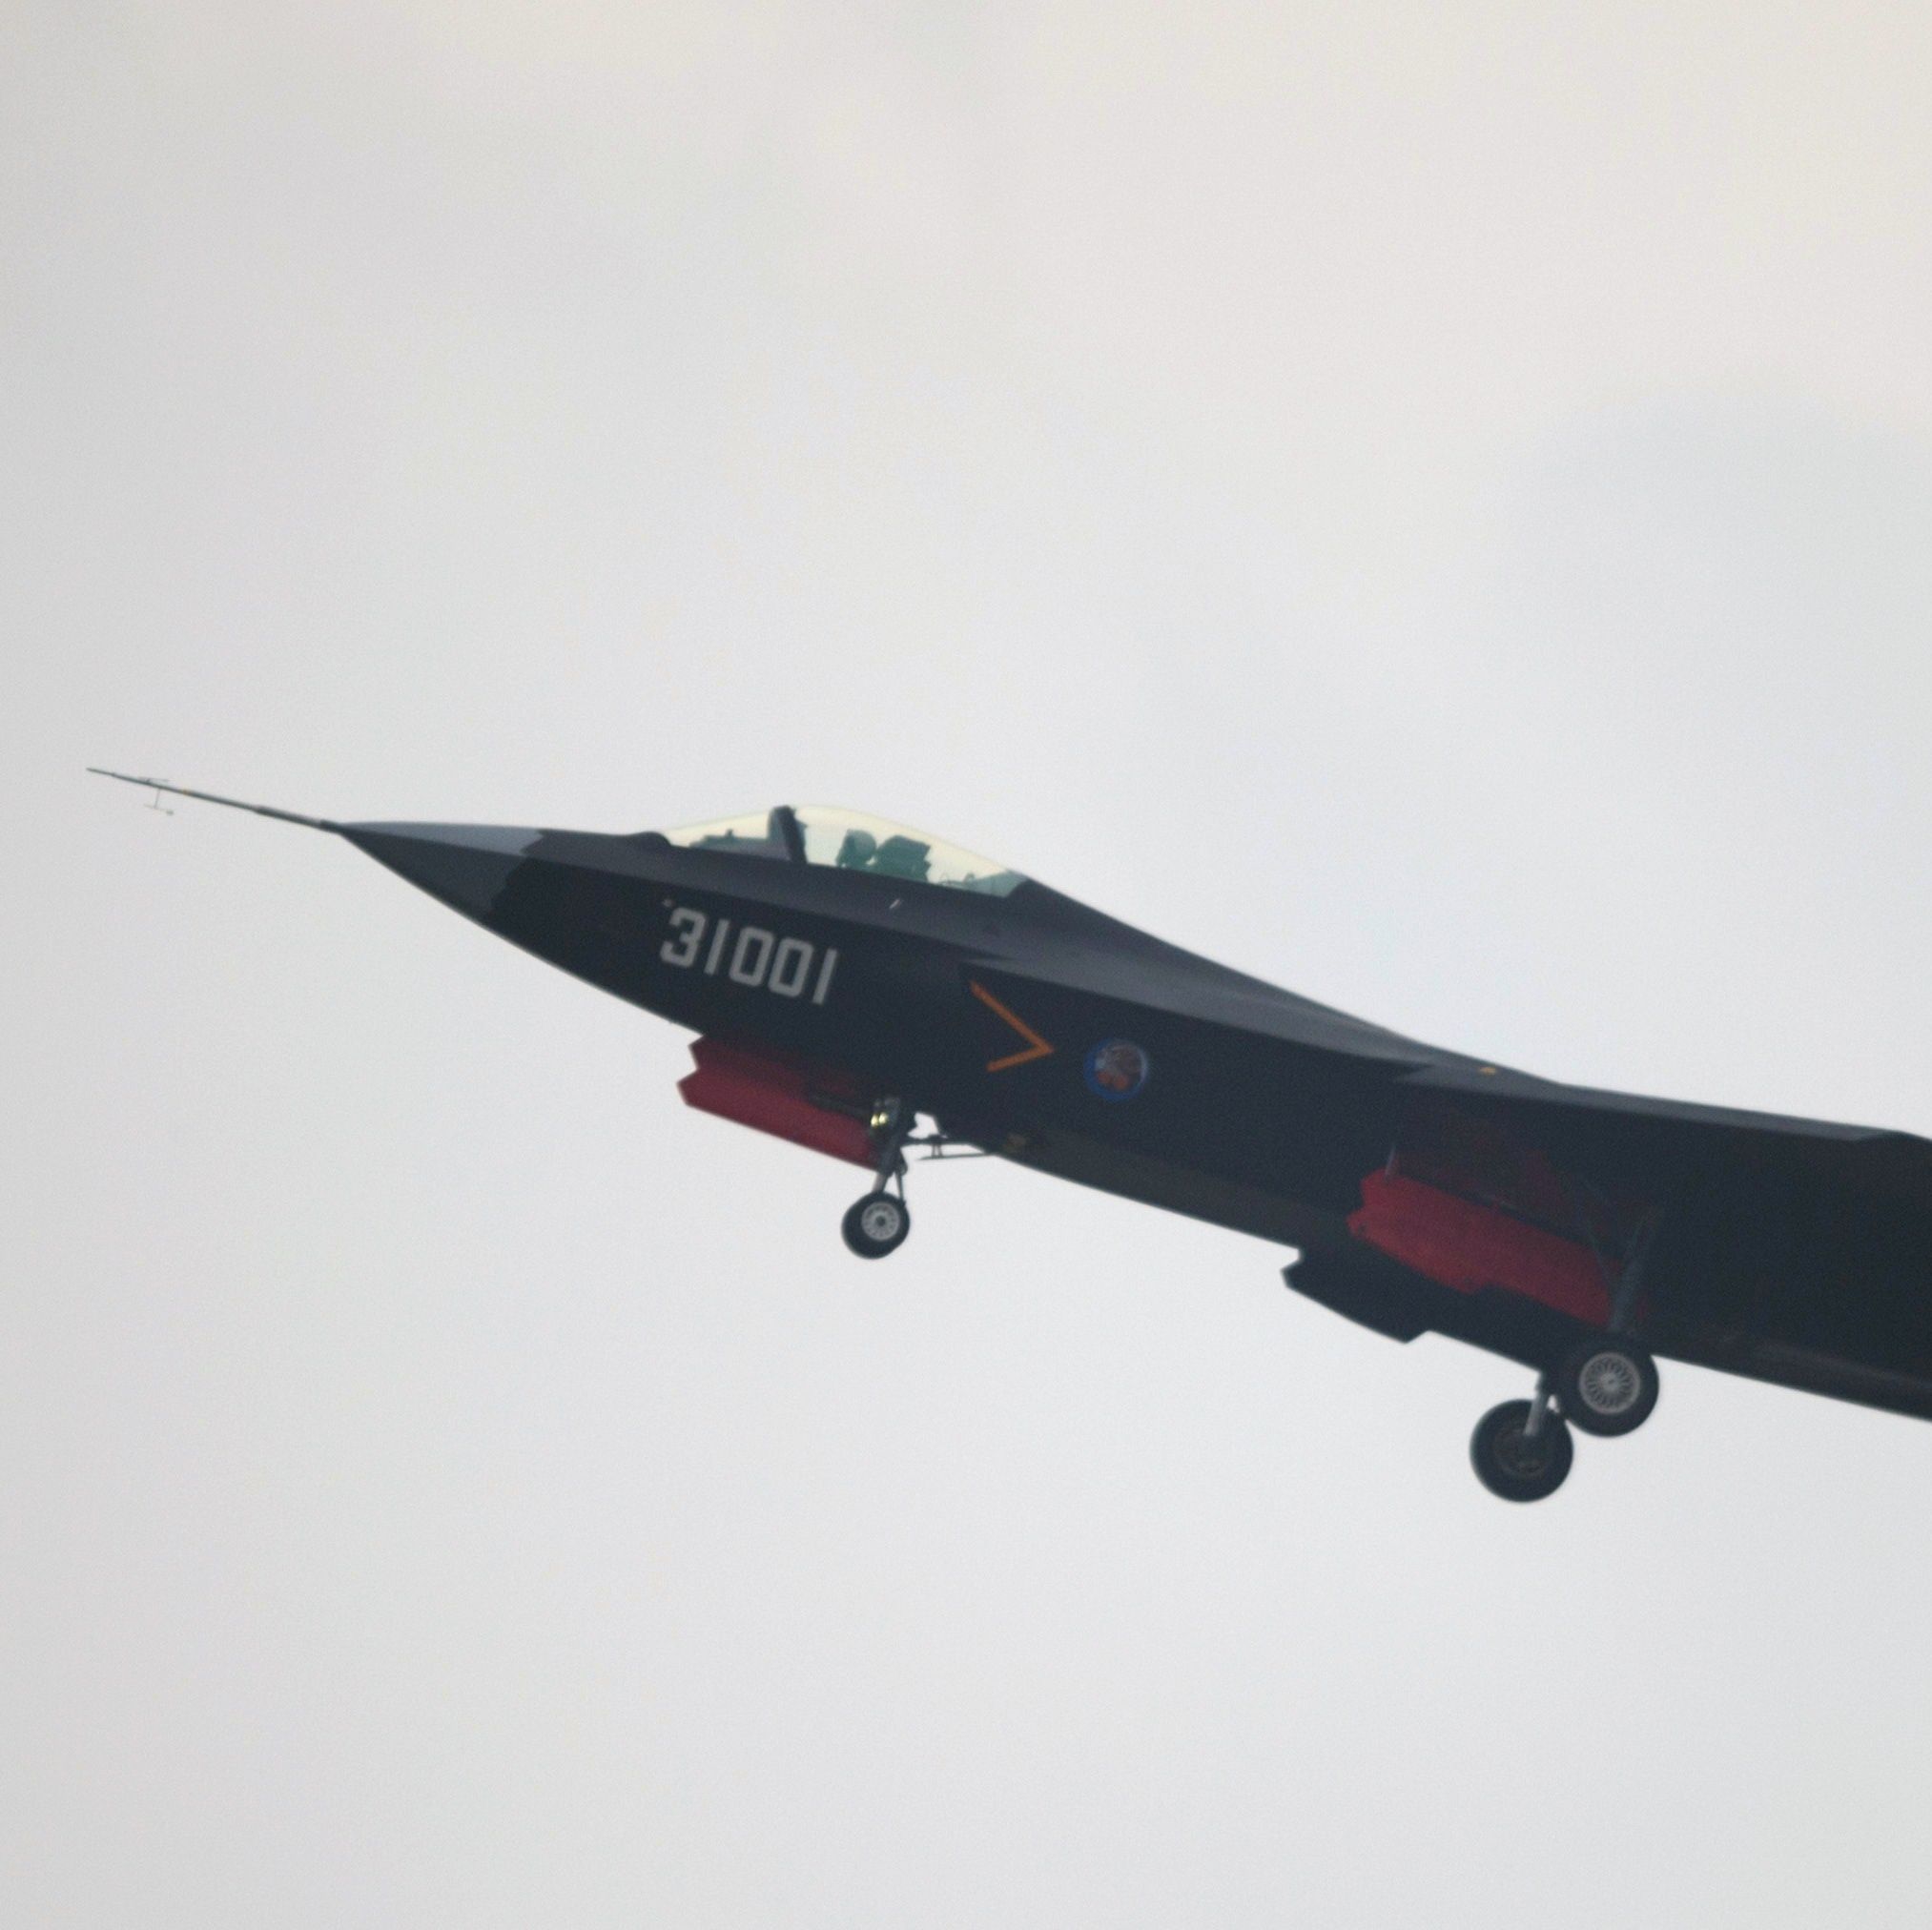 China's Stealthy New Fighter Just Made an Appearance in the Wild